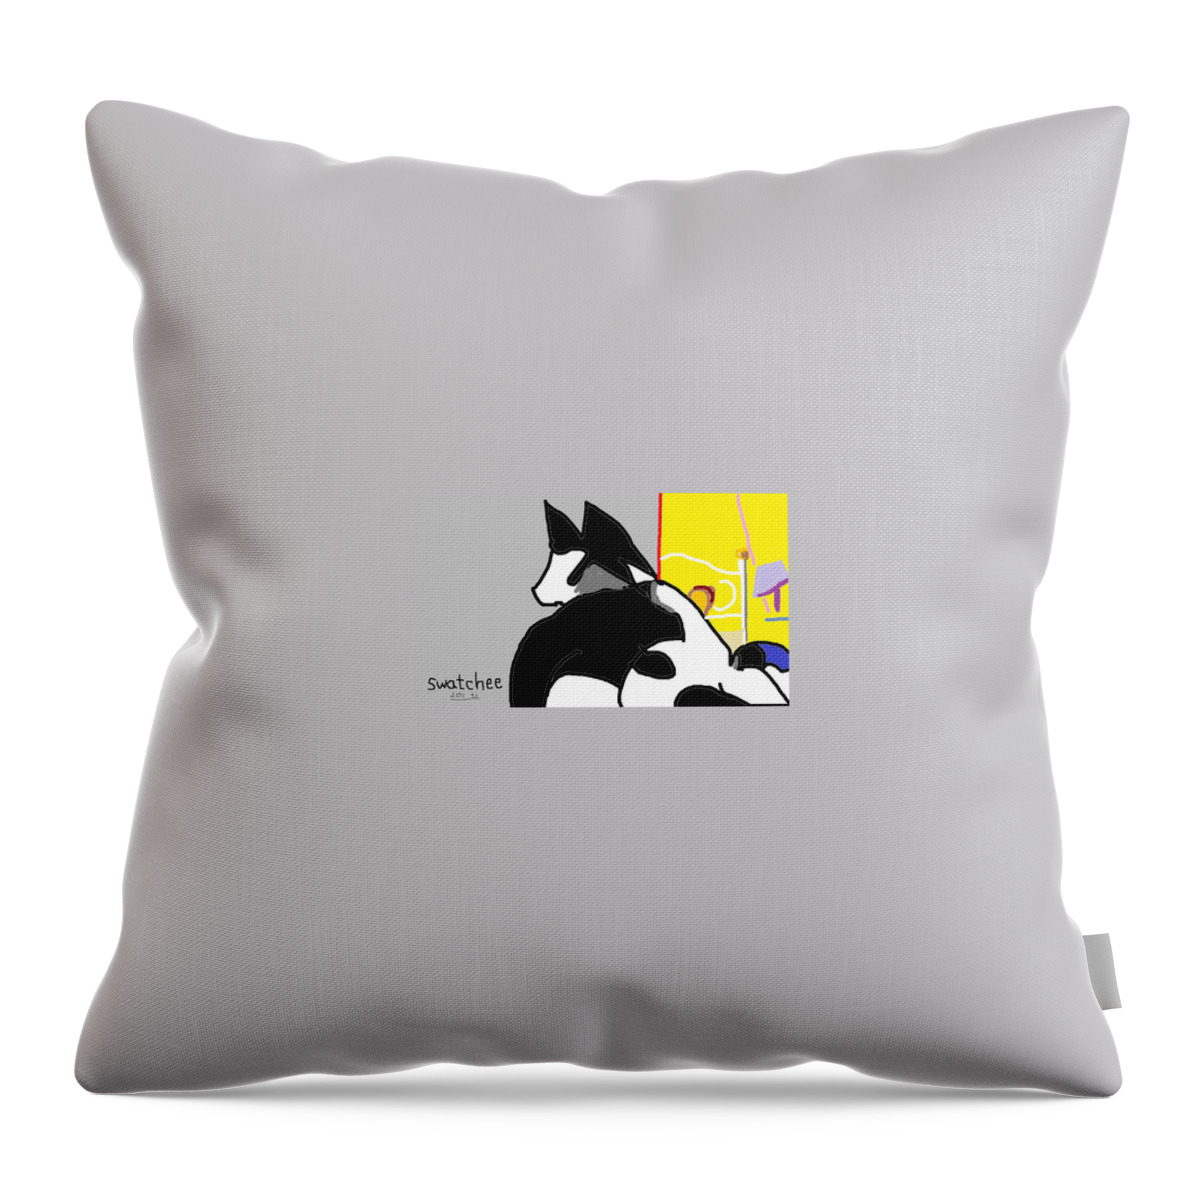 Animals Throw Pillow featuring the digital art Swatchee by Anita Dale Livaditis